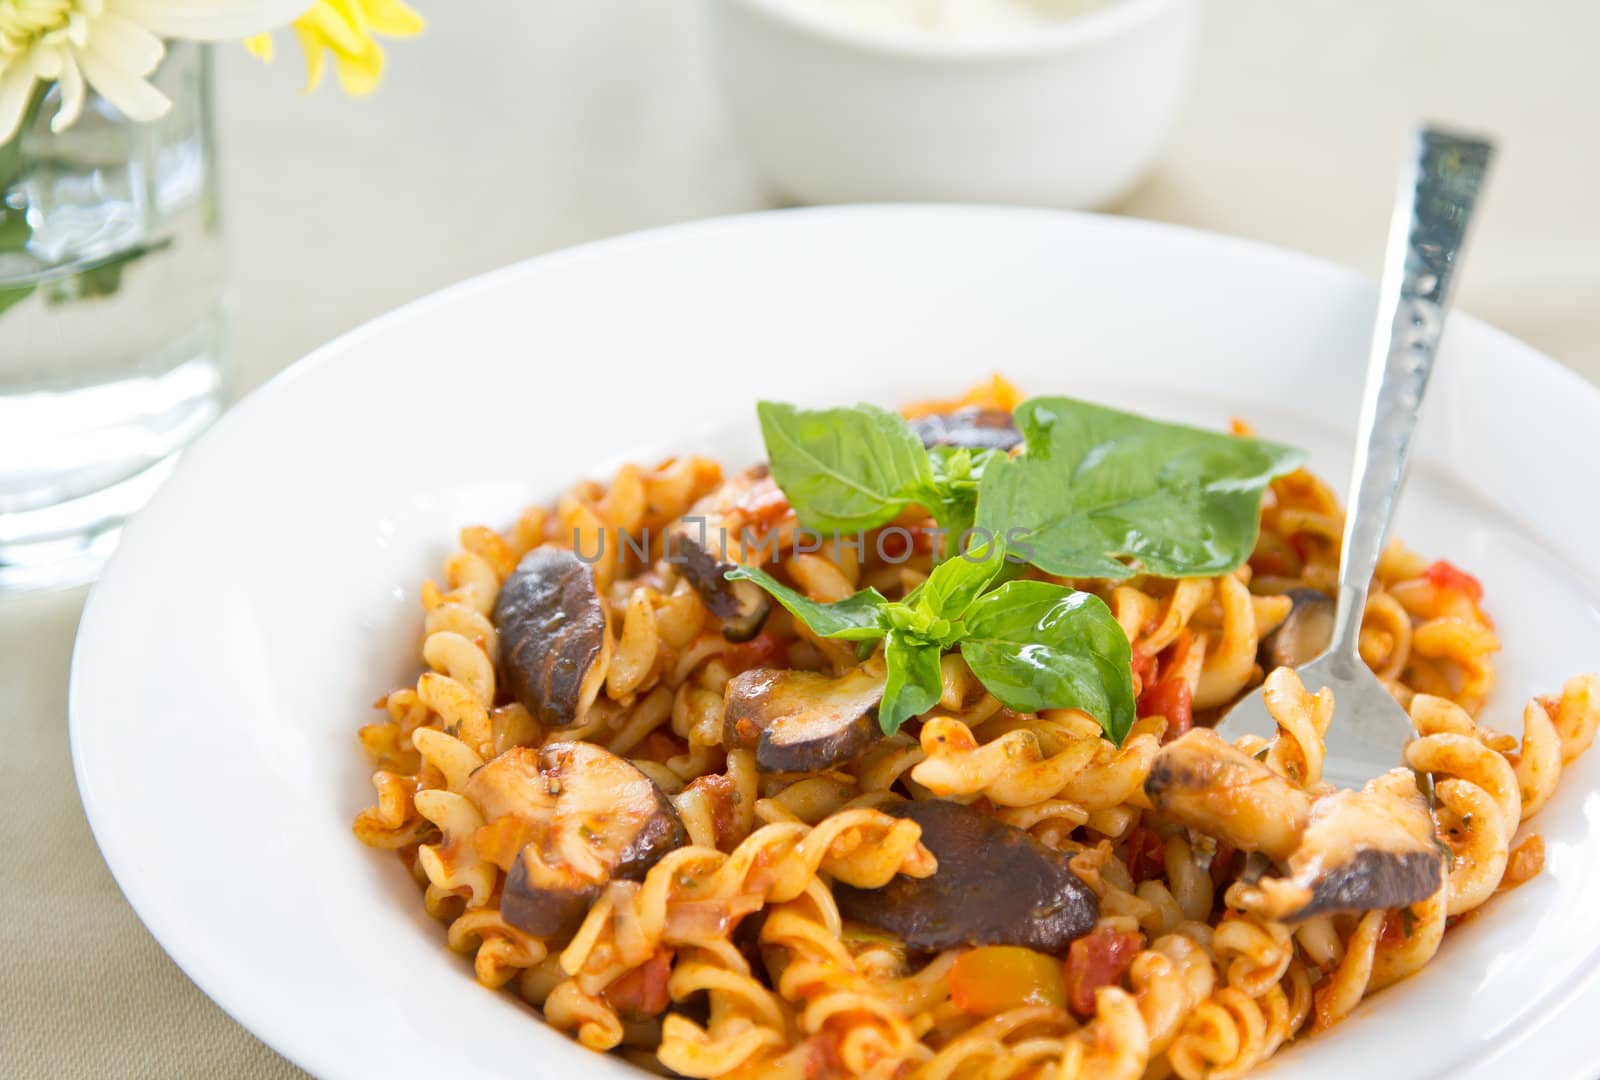 Fusili with mushroom in tomato sauce by vanillaechoes